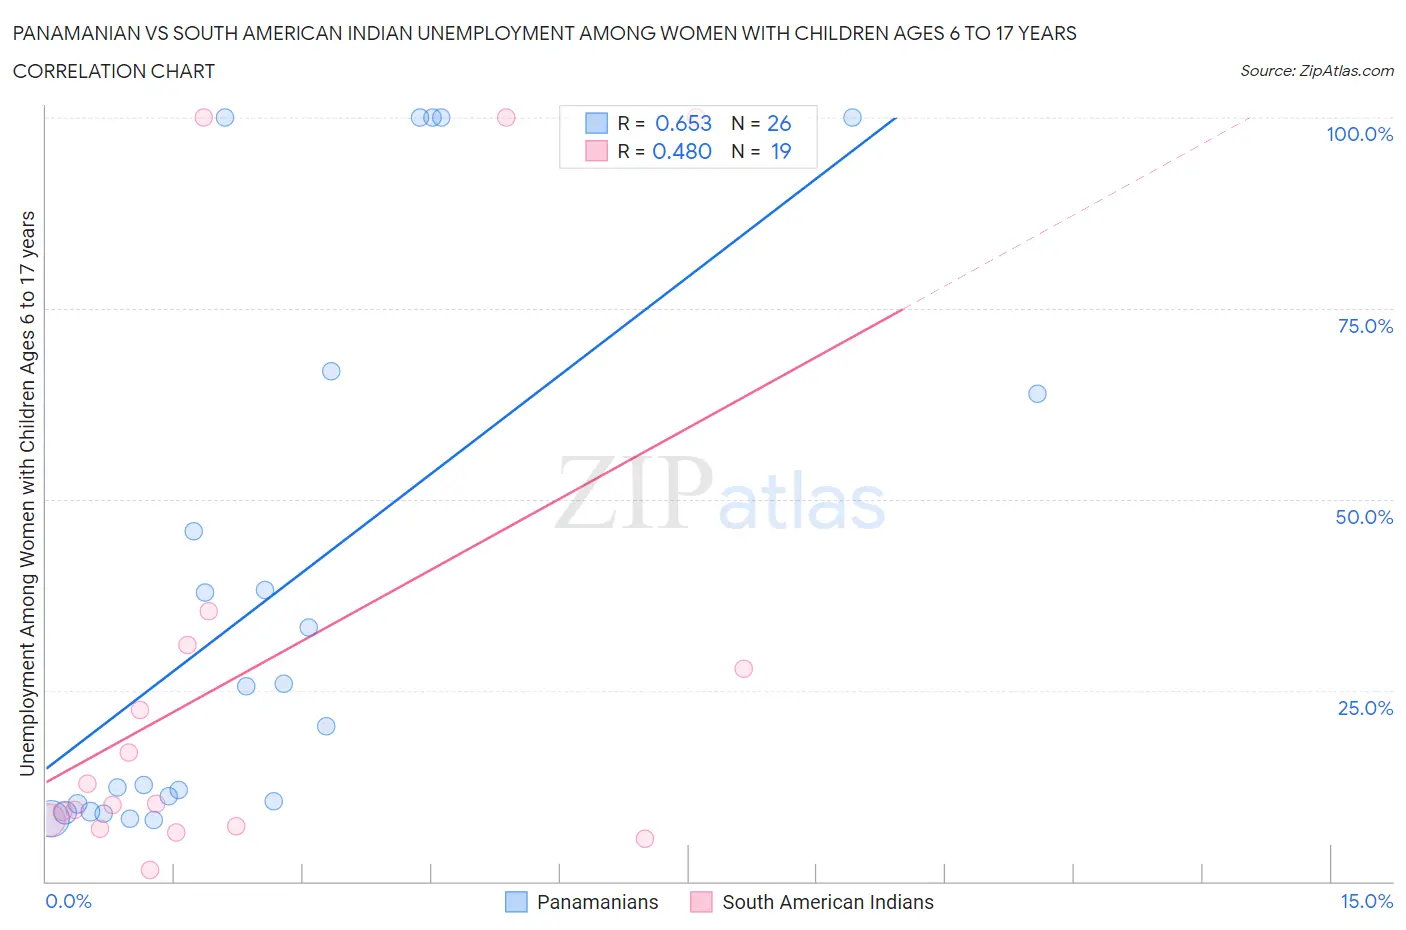 Panamanian vs South American Indian Unemployment Among Women with Children Ages 6 to 17 years